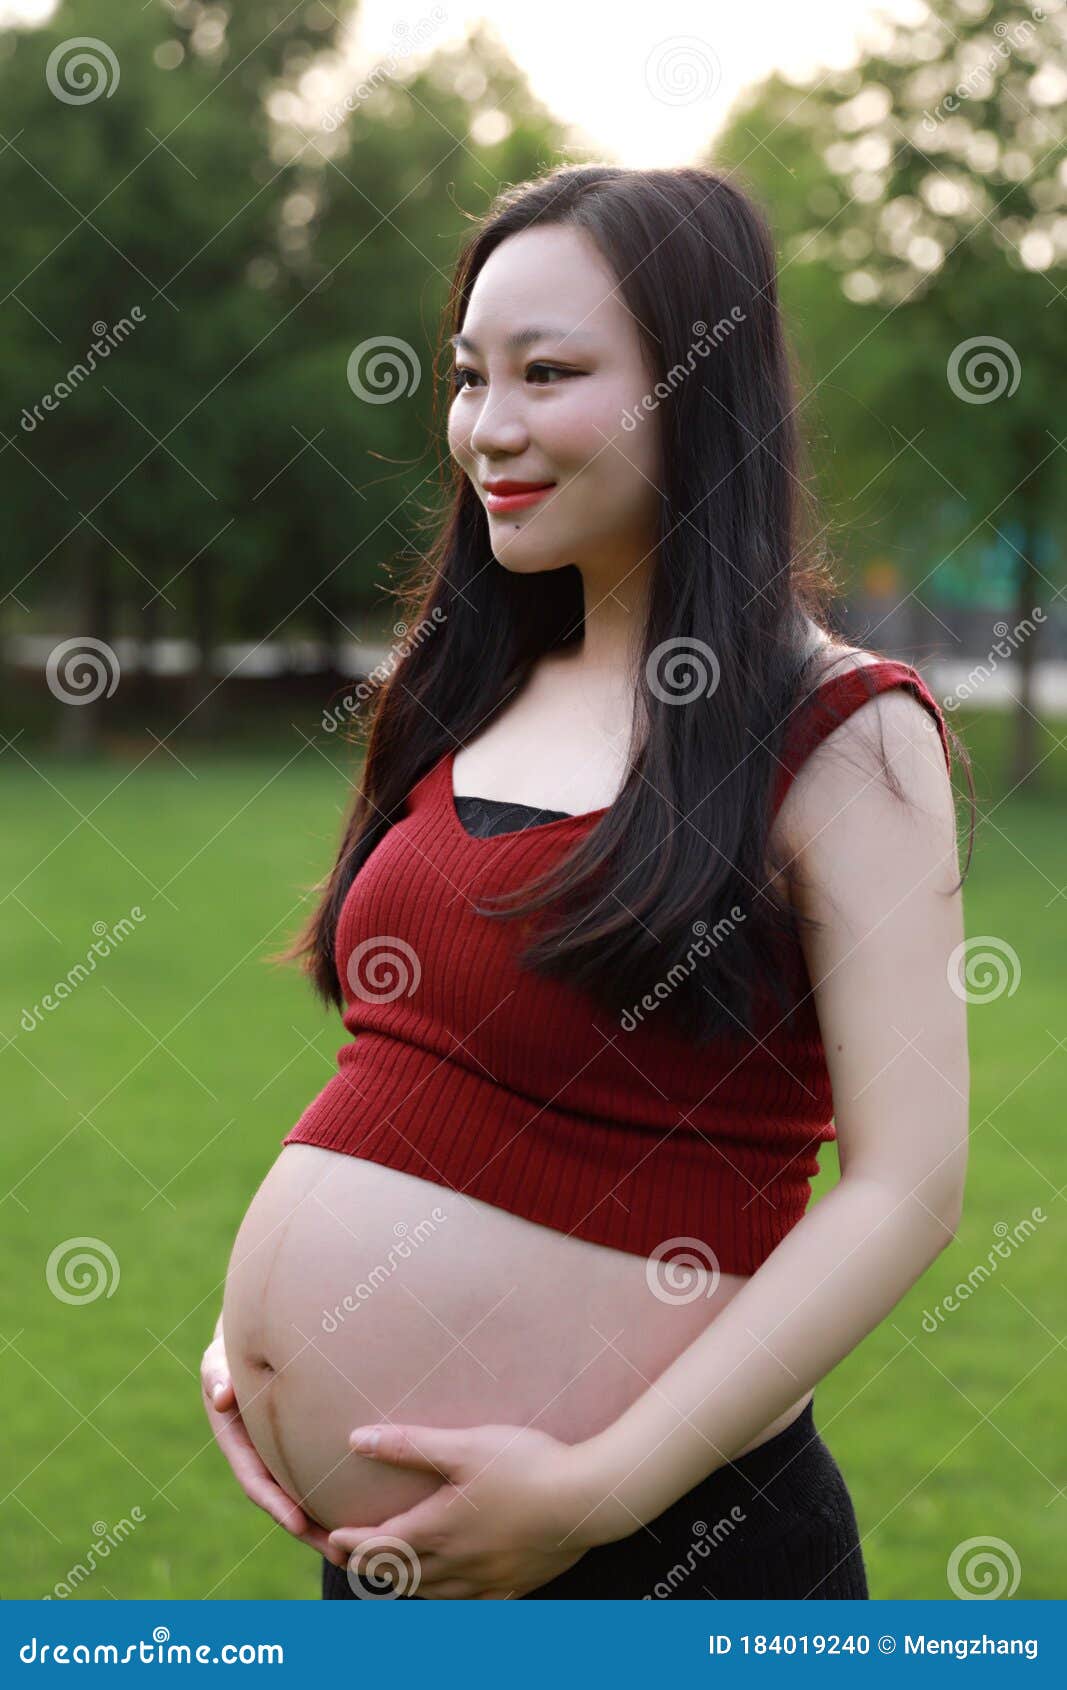 Belly Closeup Asian Pregnant Woman In Garden Forest Law